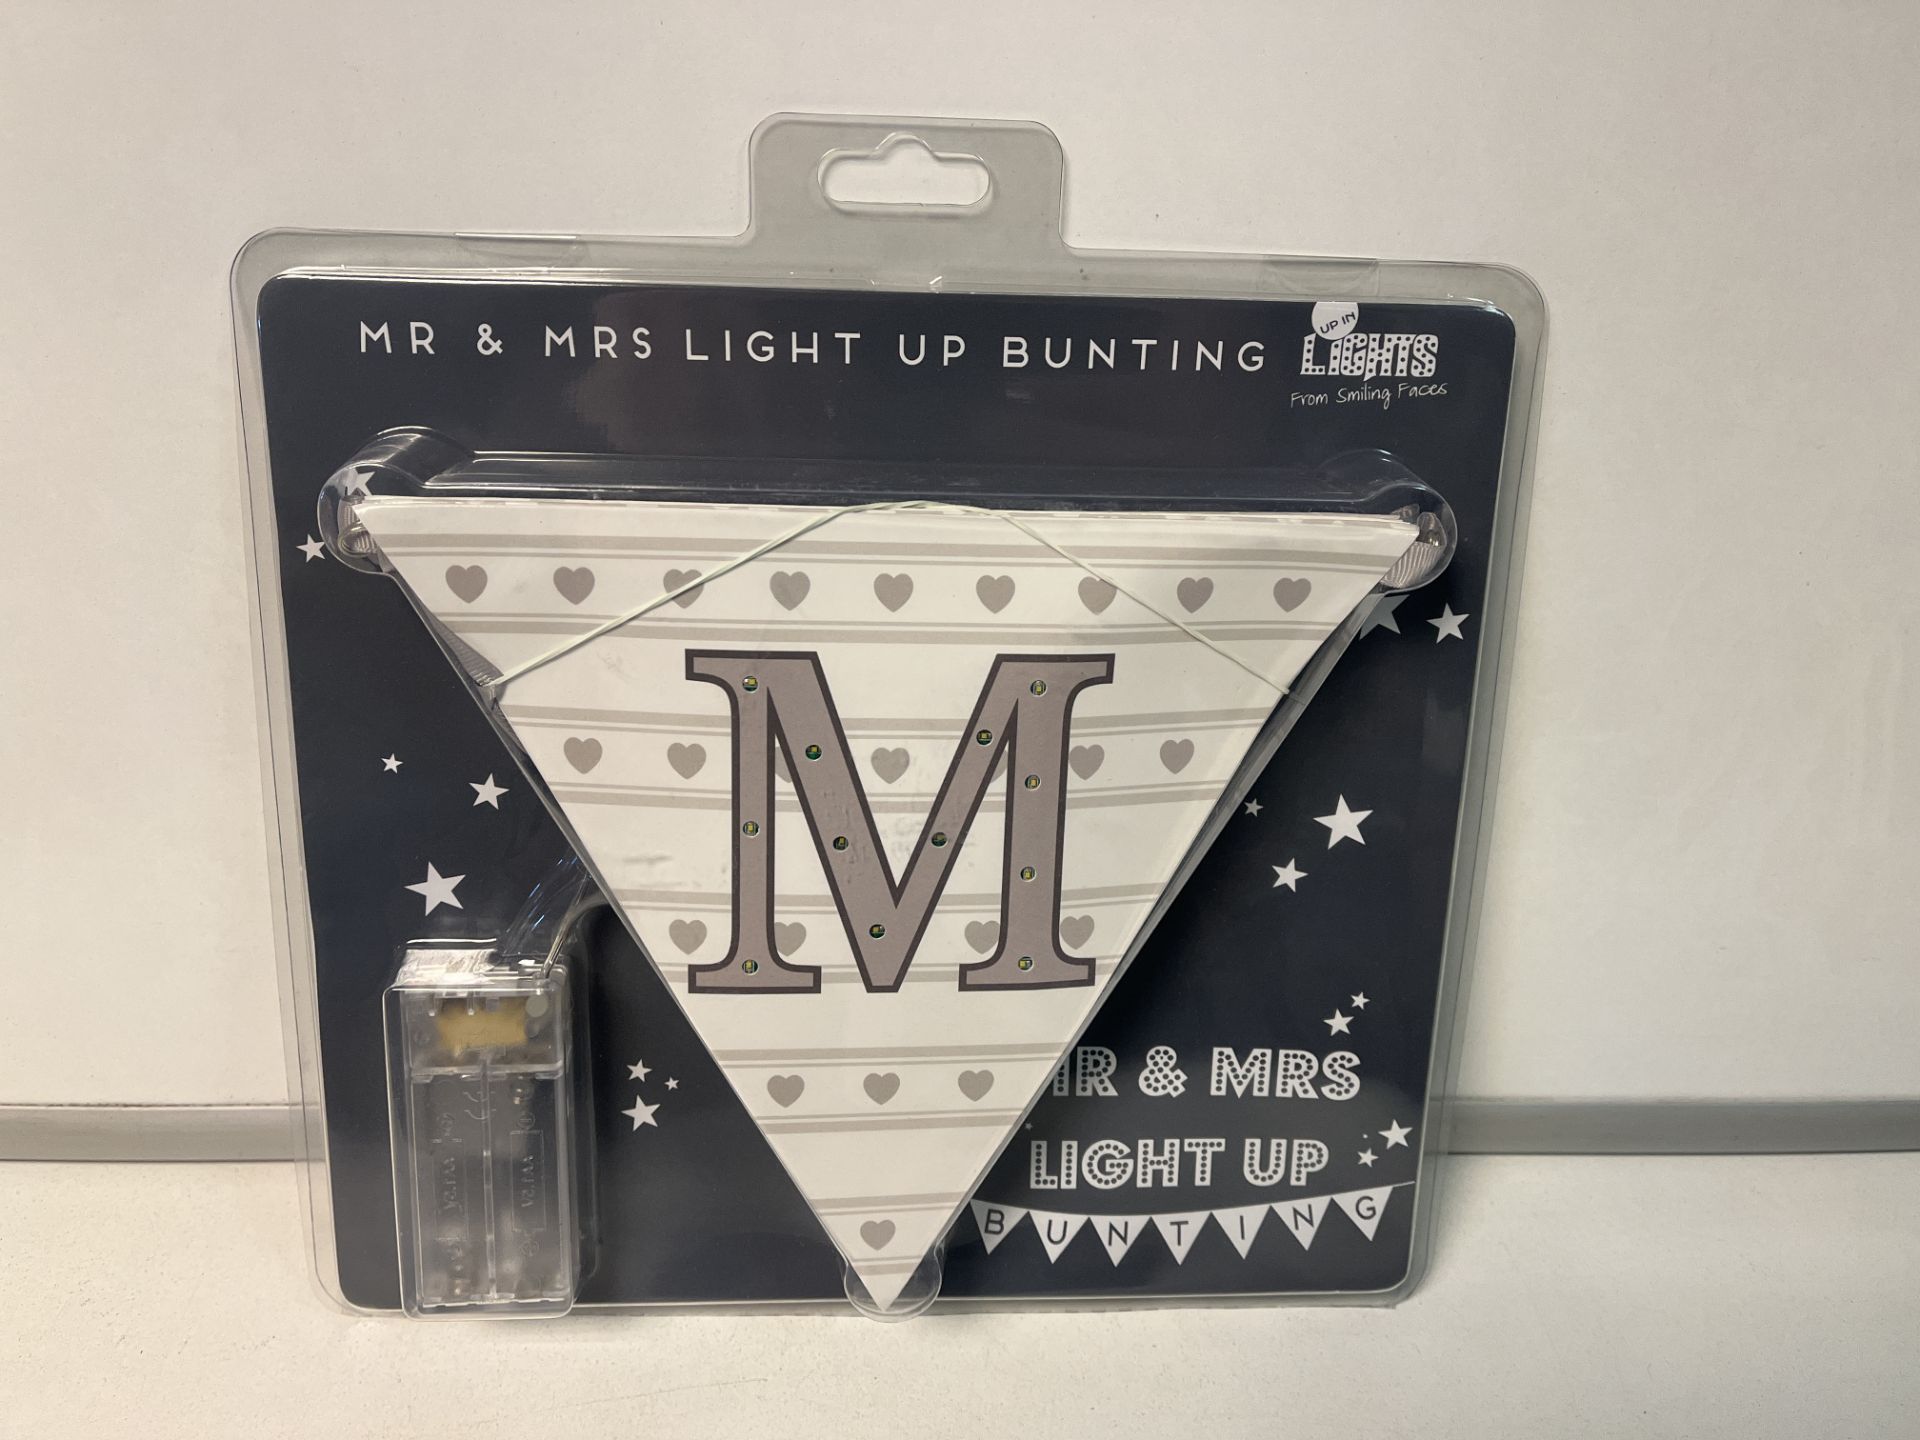 30 X BRAND NEW MR AND MRS LIGHT UP BUNTINGS RRP £18 EACH S1RA